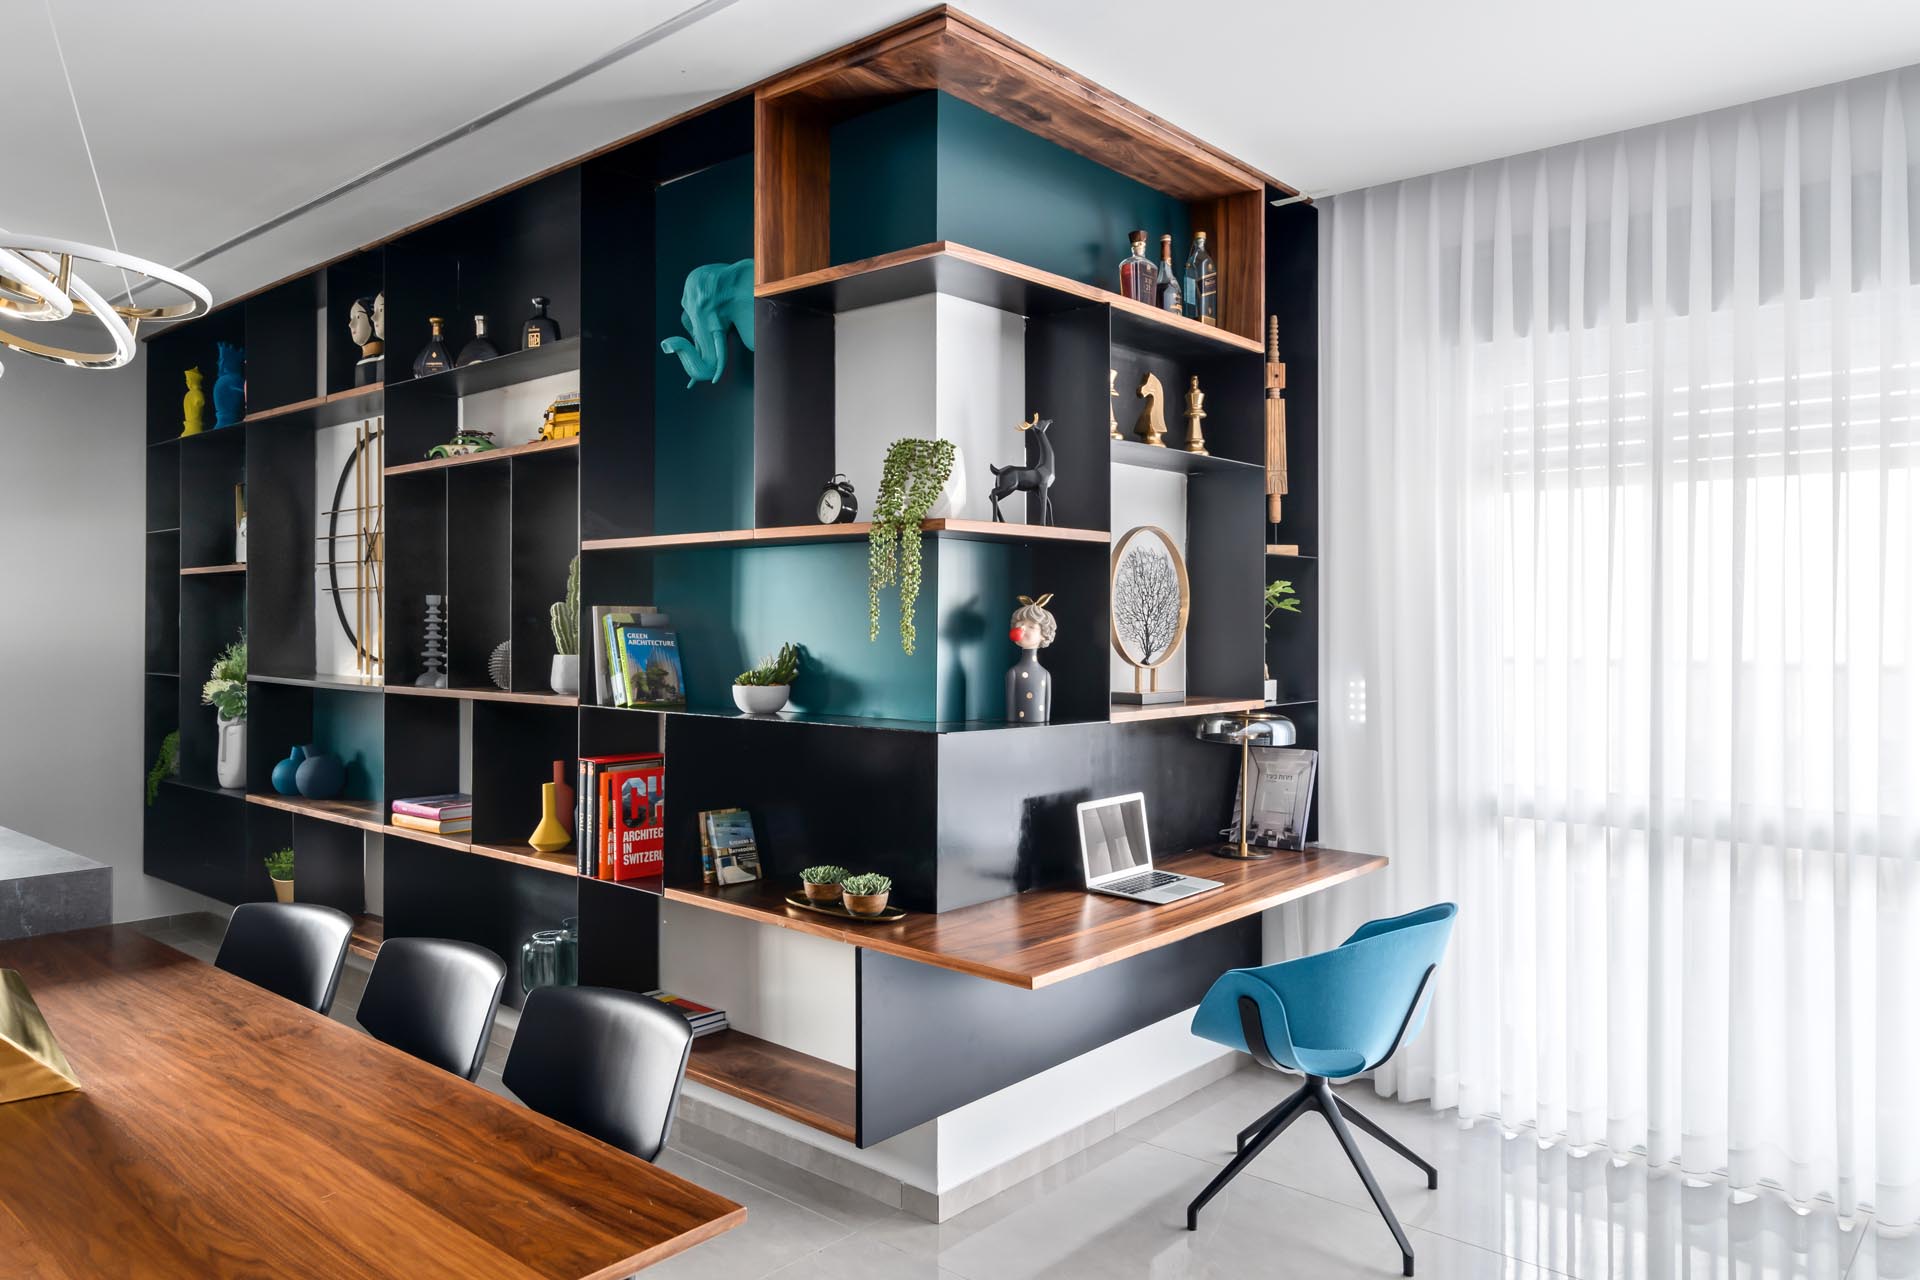 One of the key design elements in this apartment is the inclusion of an entire wall that's filled with steel and wood shelving, and has pop of turquoise adding a colorful accent to the open plan interior.